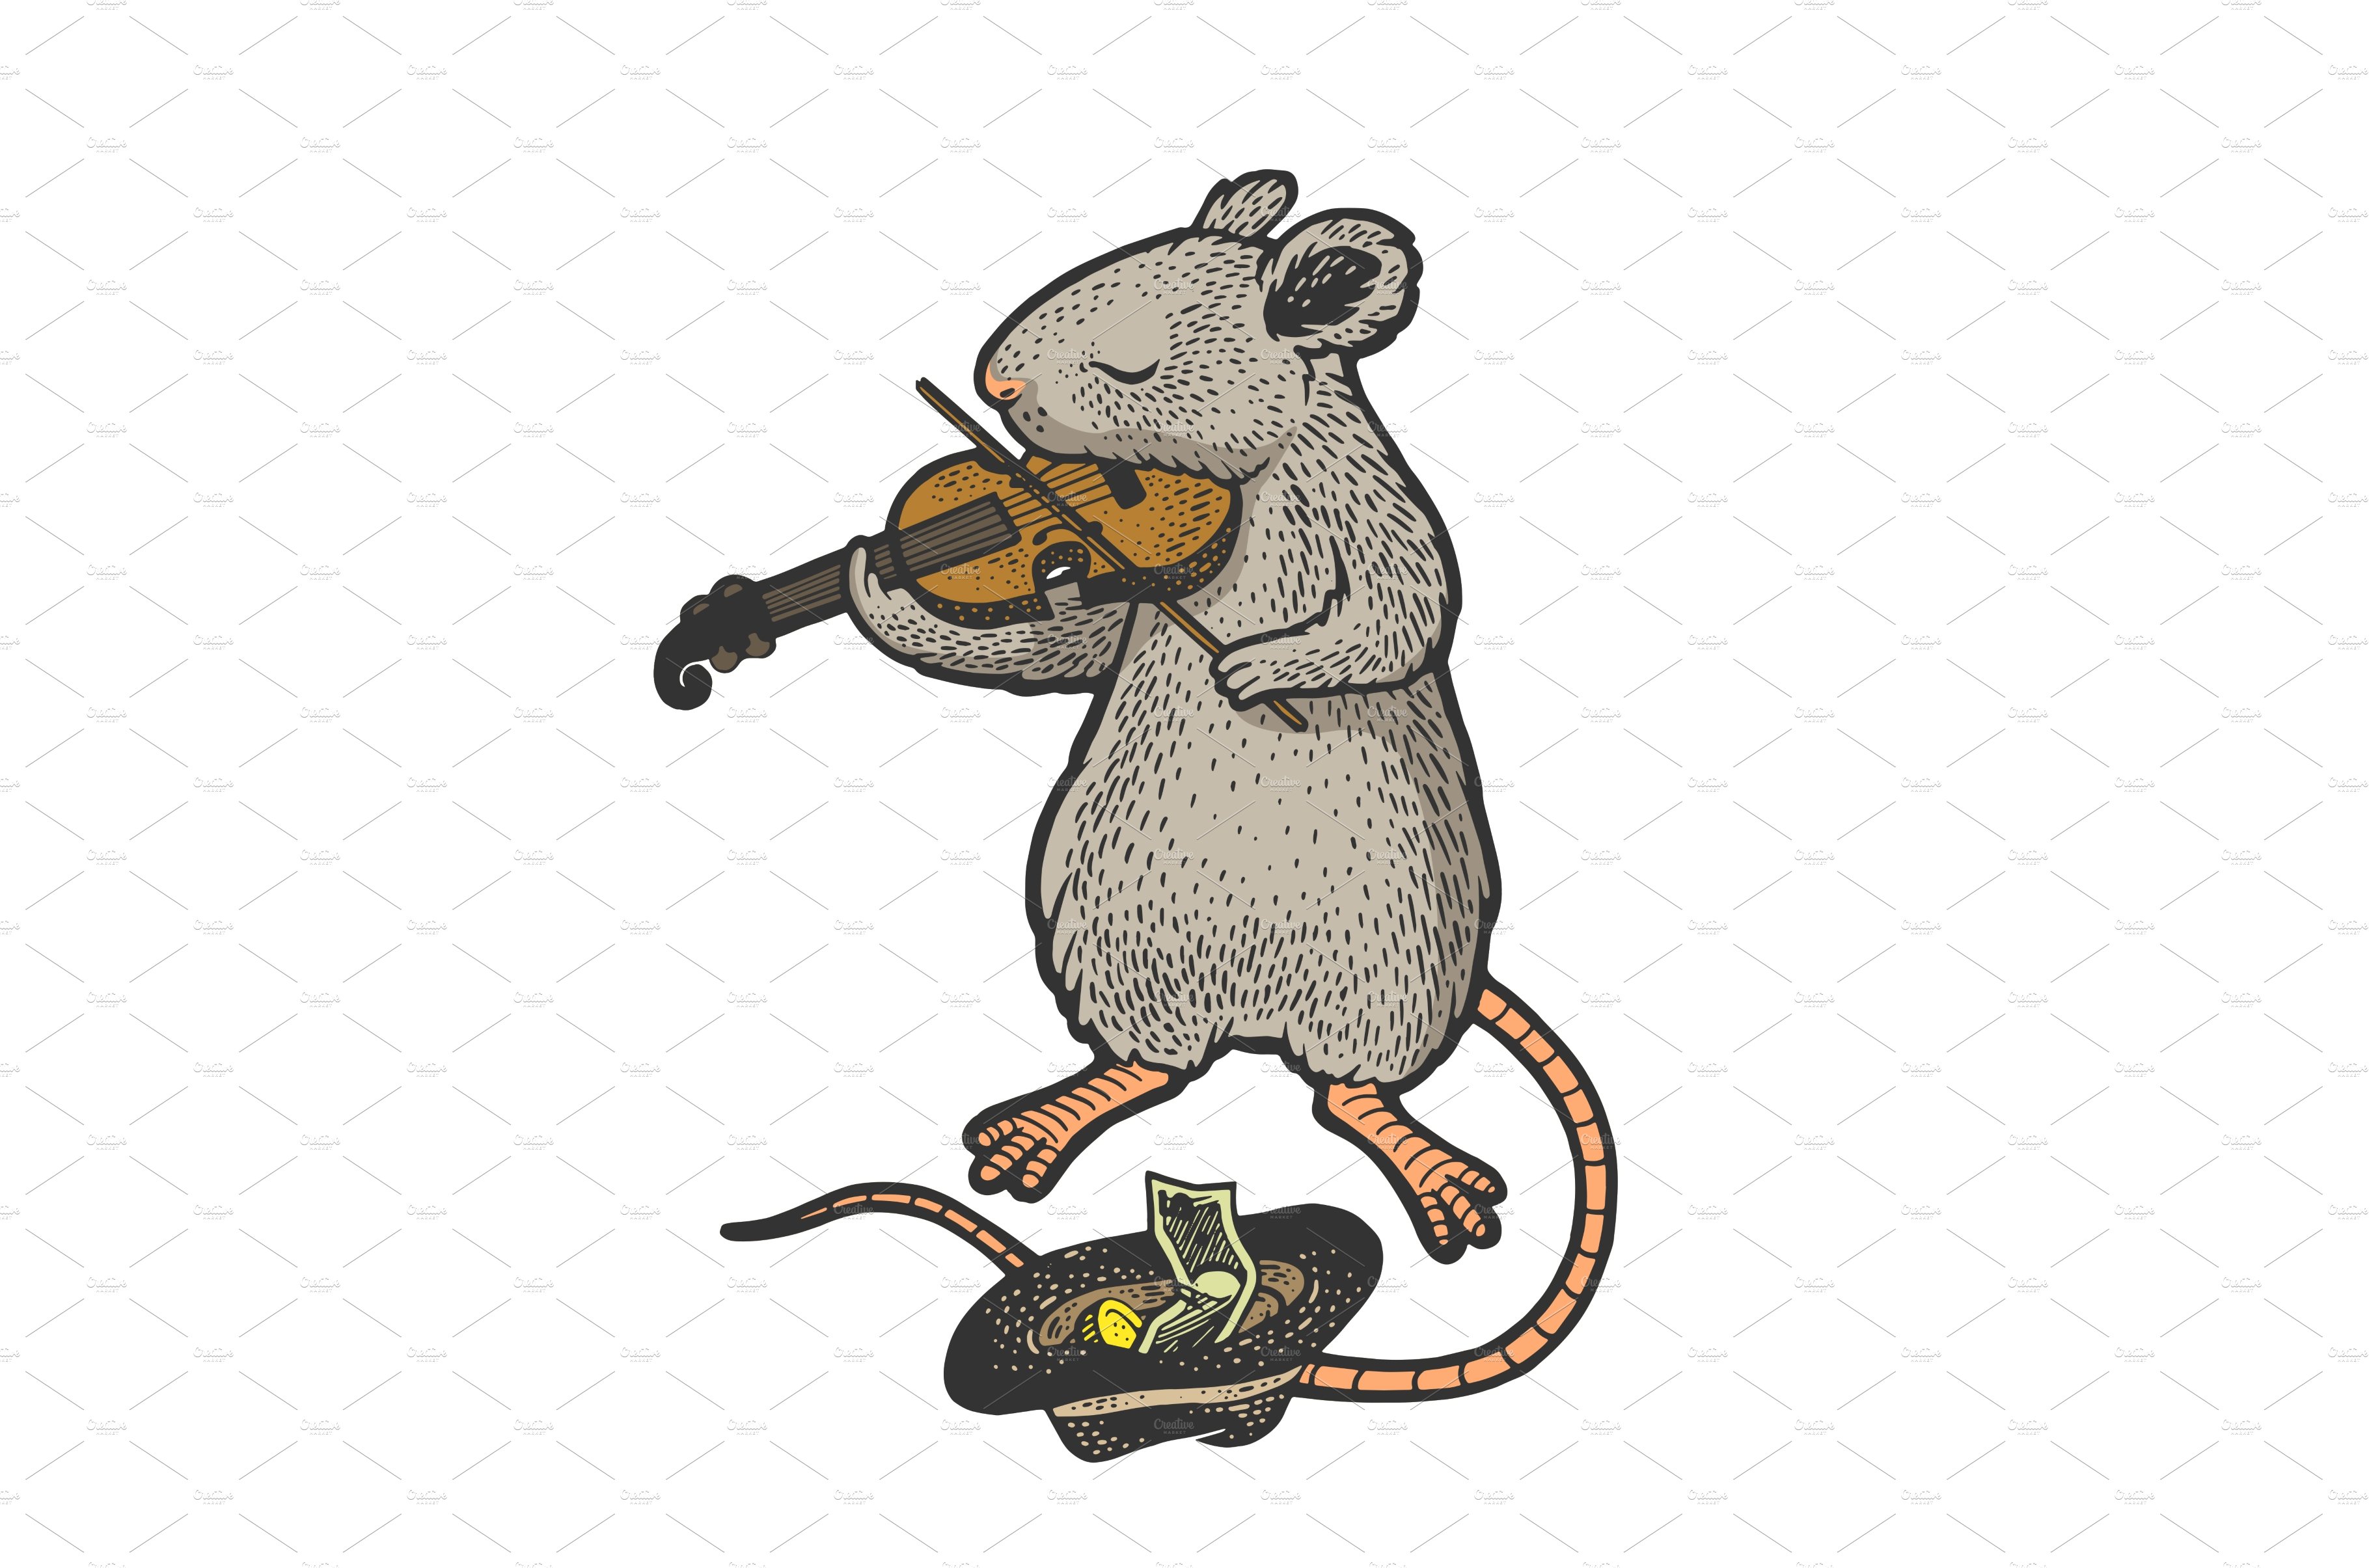 mouse plays the violin sketch vector cover image.